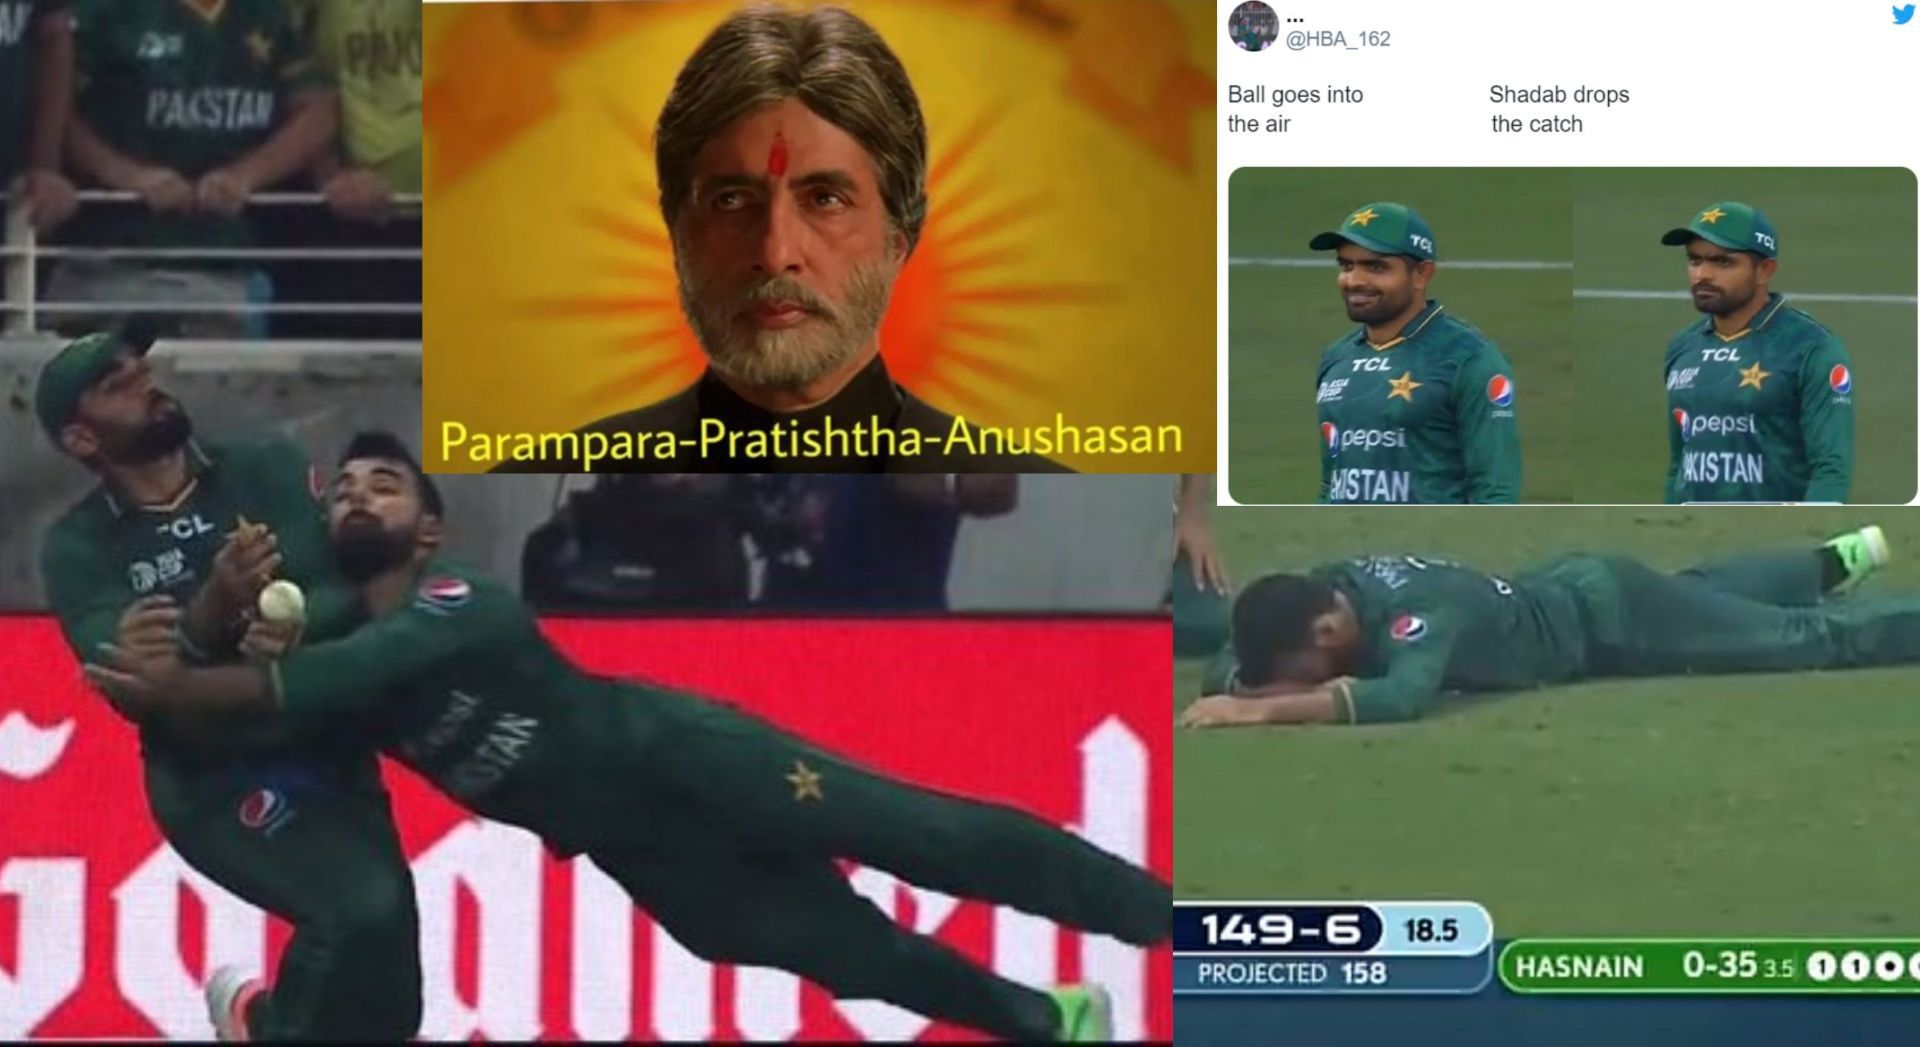 Fans troll Pakistan for dropping multiple catches 